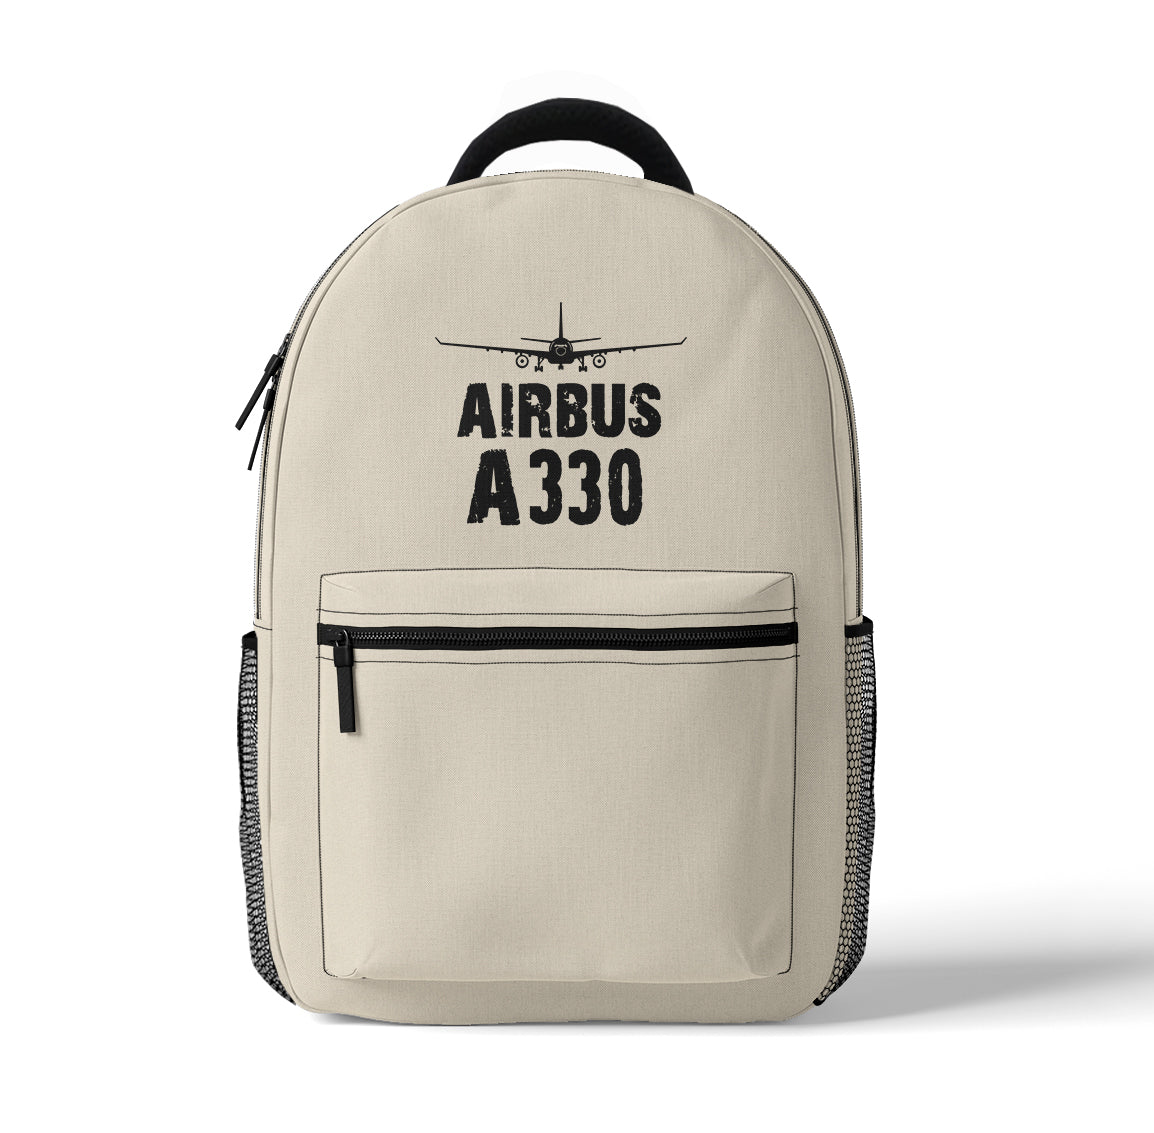 Airbus A330 & Plane Designed 3D Backpacks